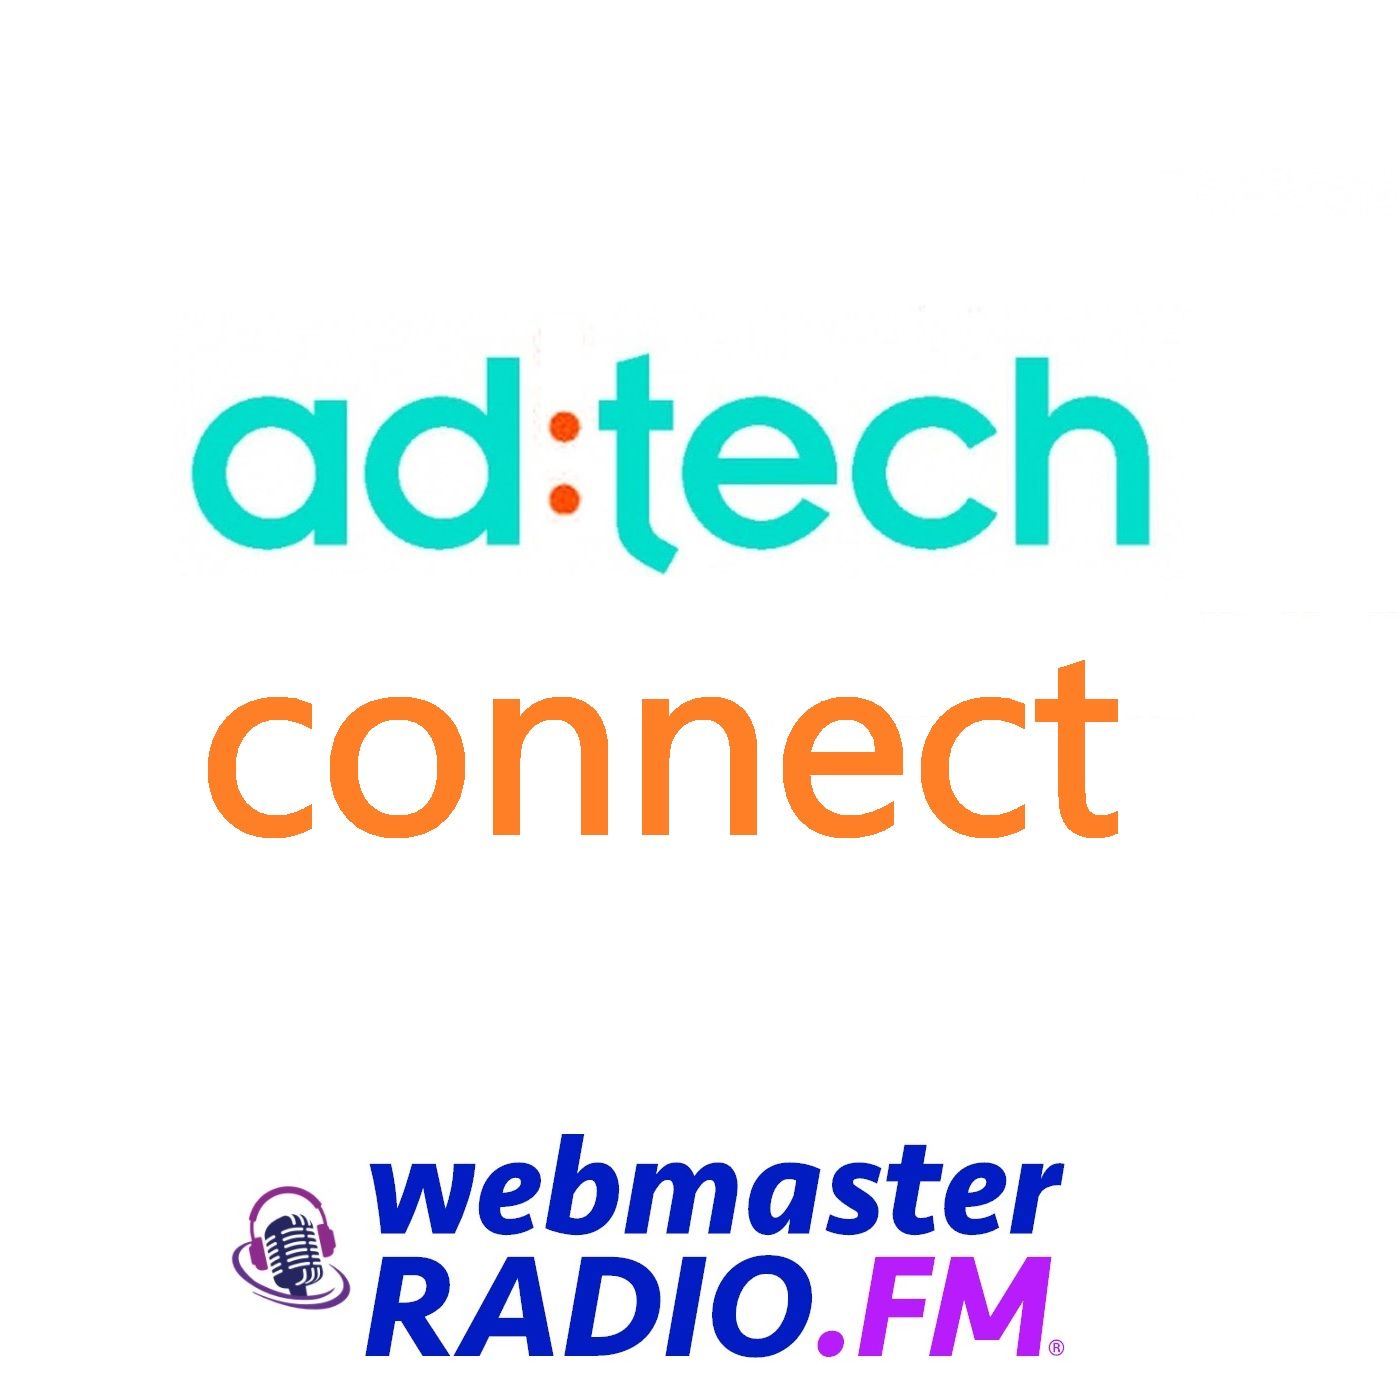 Meredith Medland Live from Ad:Tech Chicago